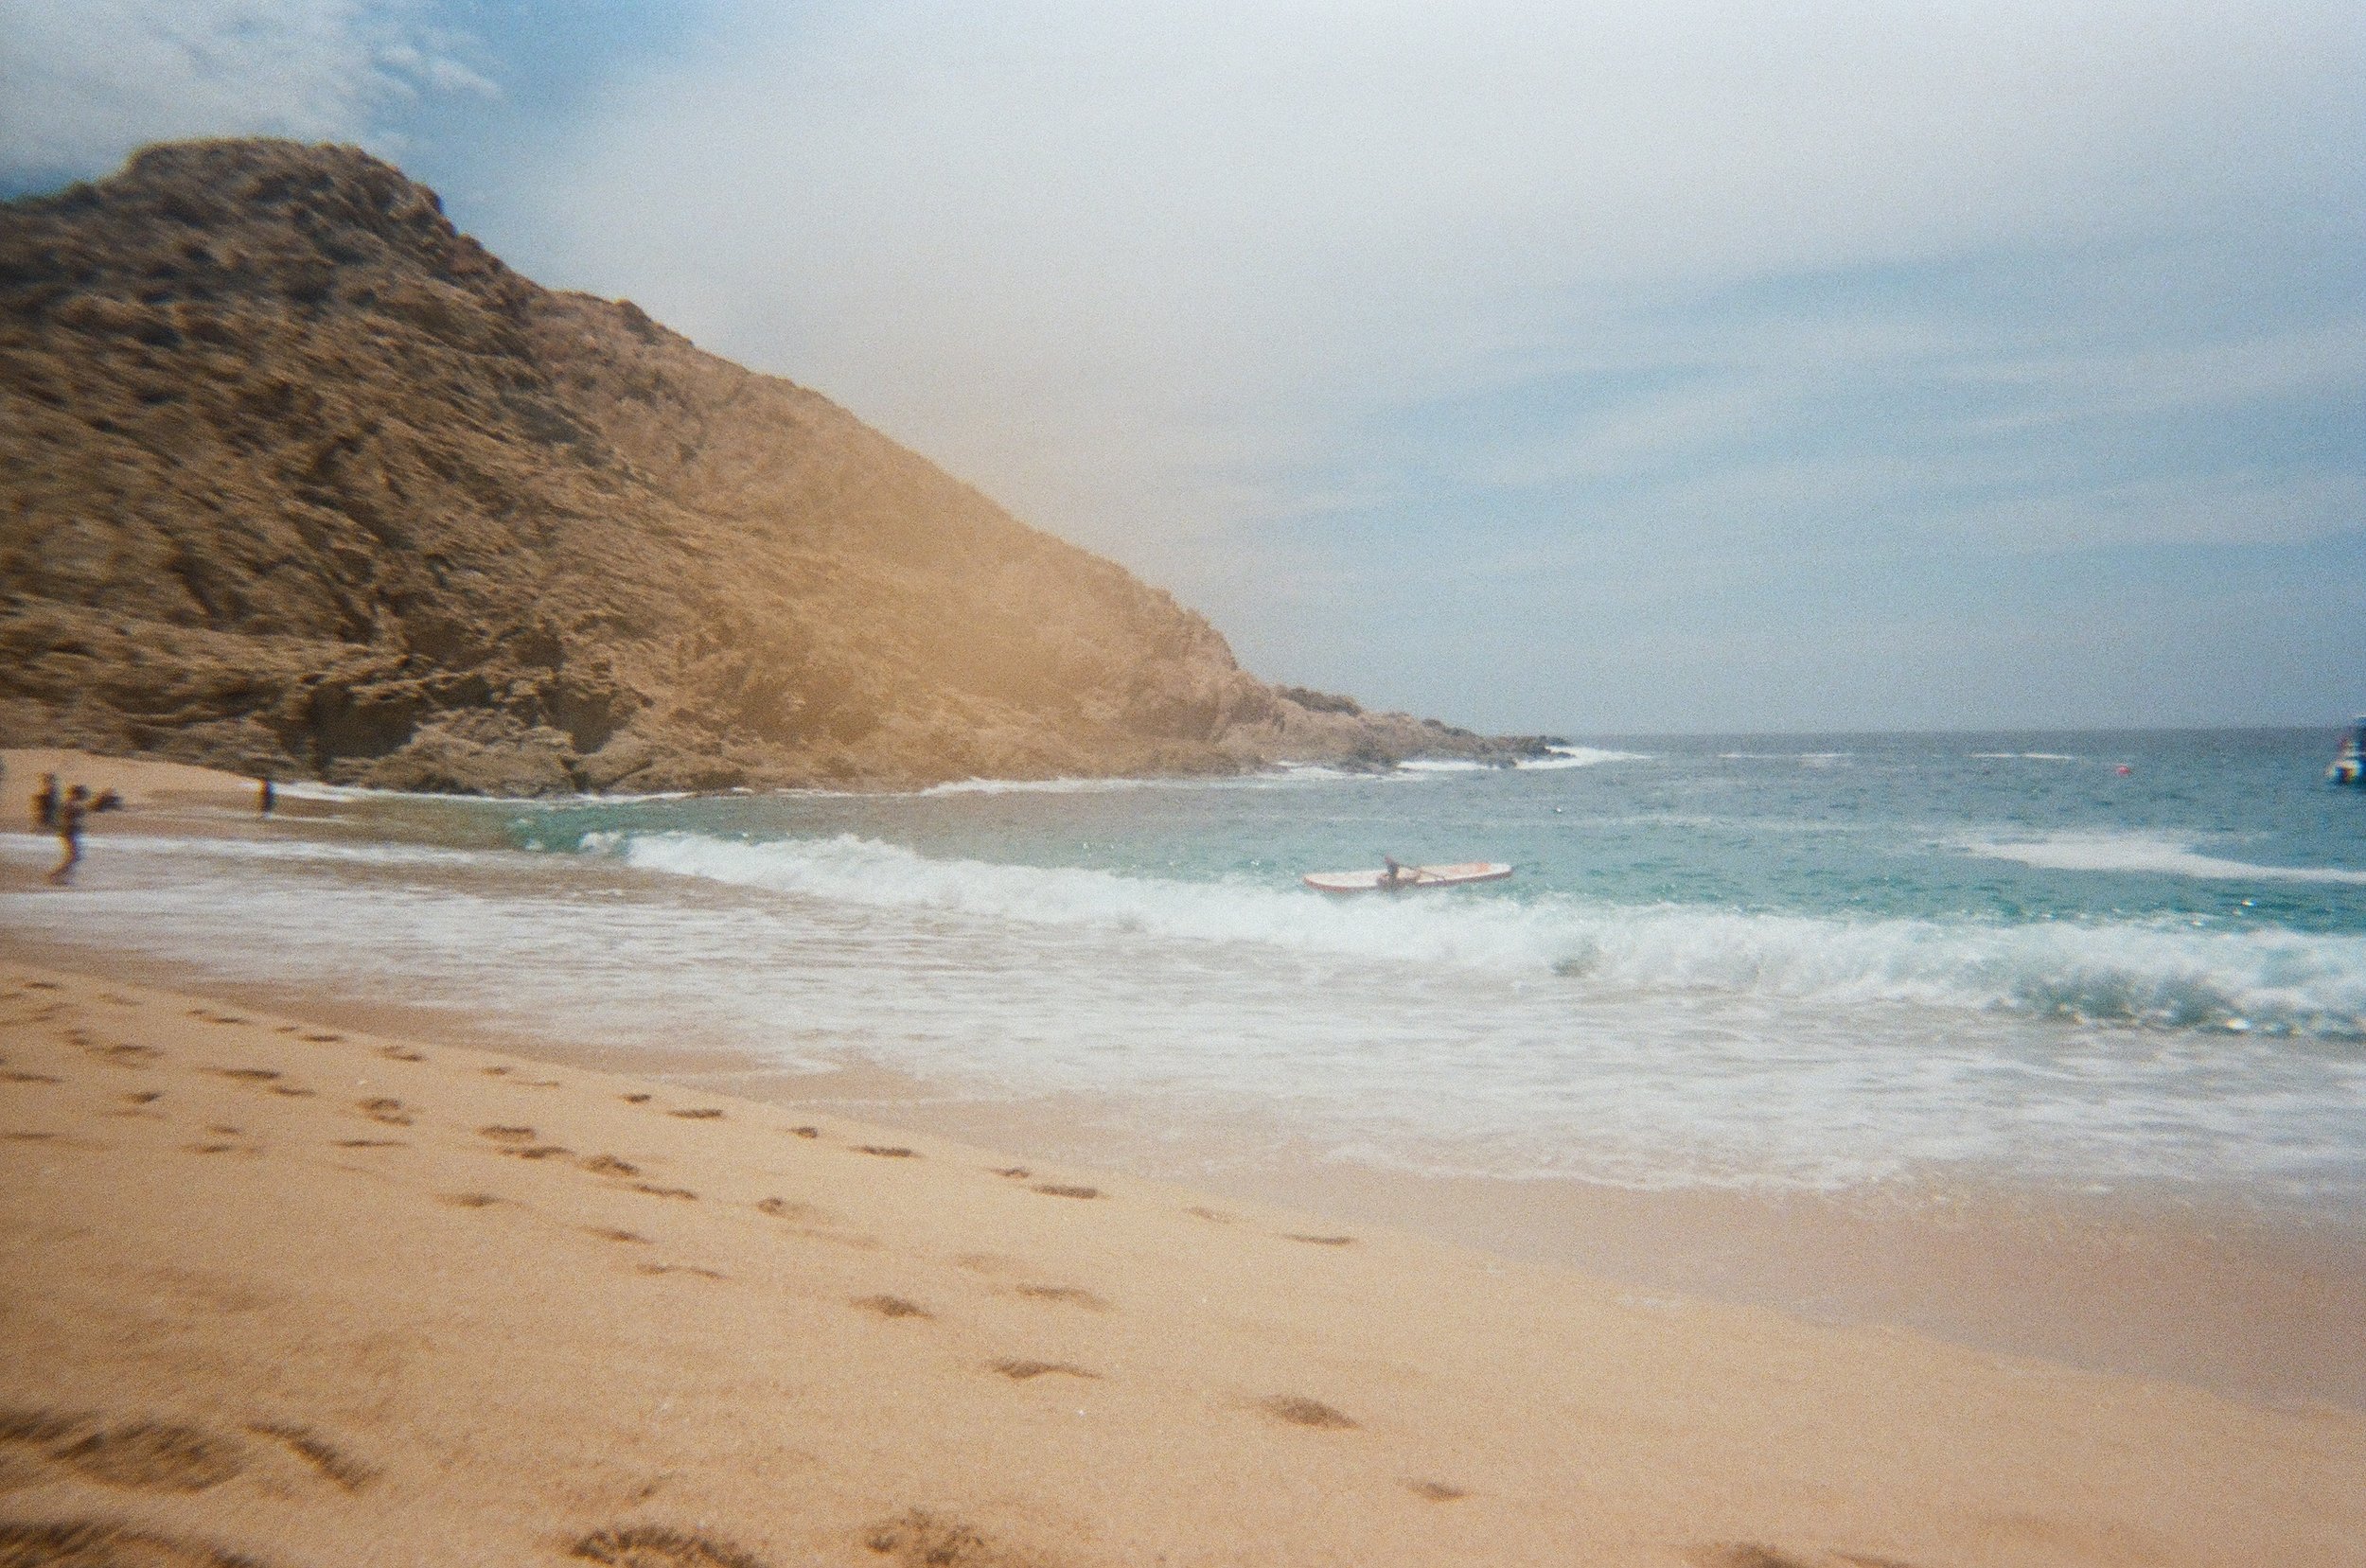 35mm film of Cabo